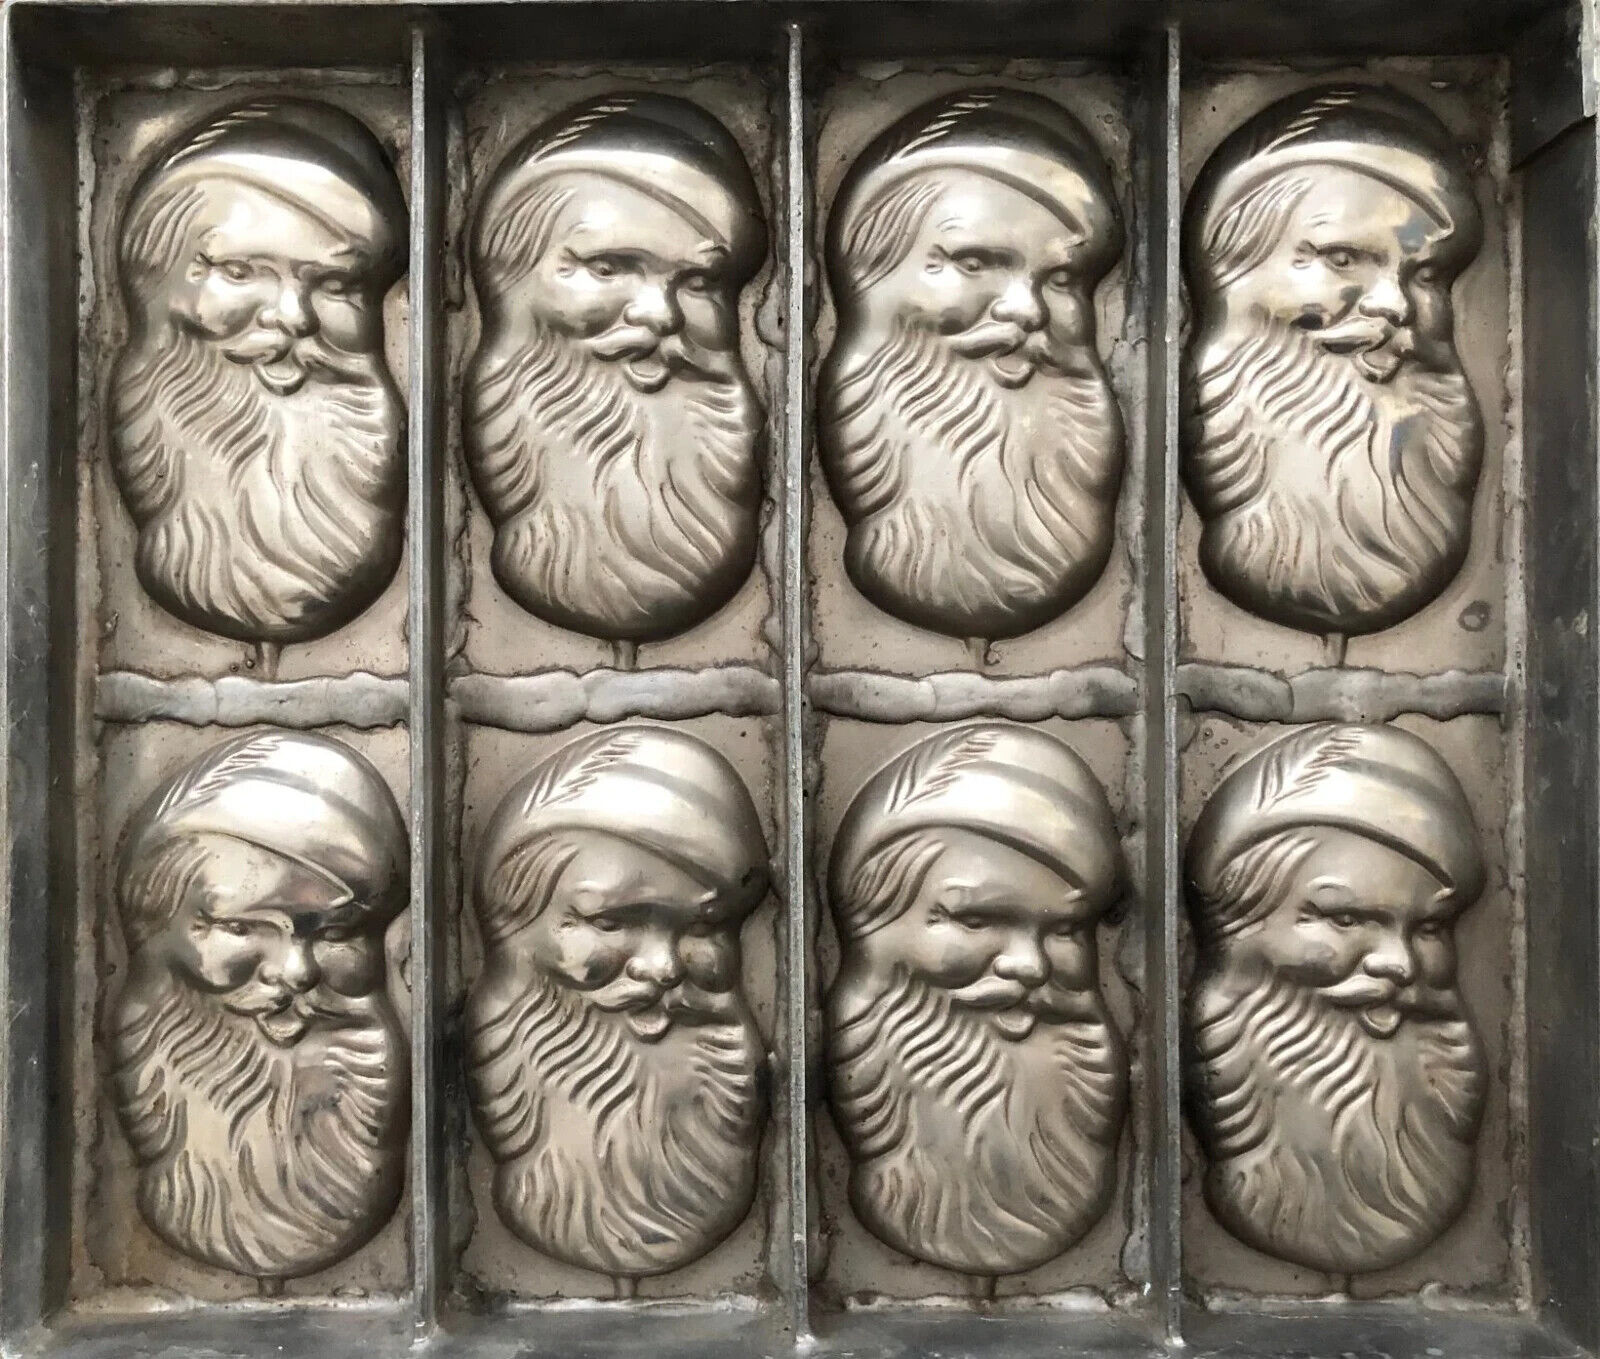 Antique flat chocolate mold - 12.5 x 14.5 - Smiling Santa Claus - Germany or USA